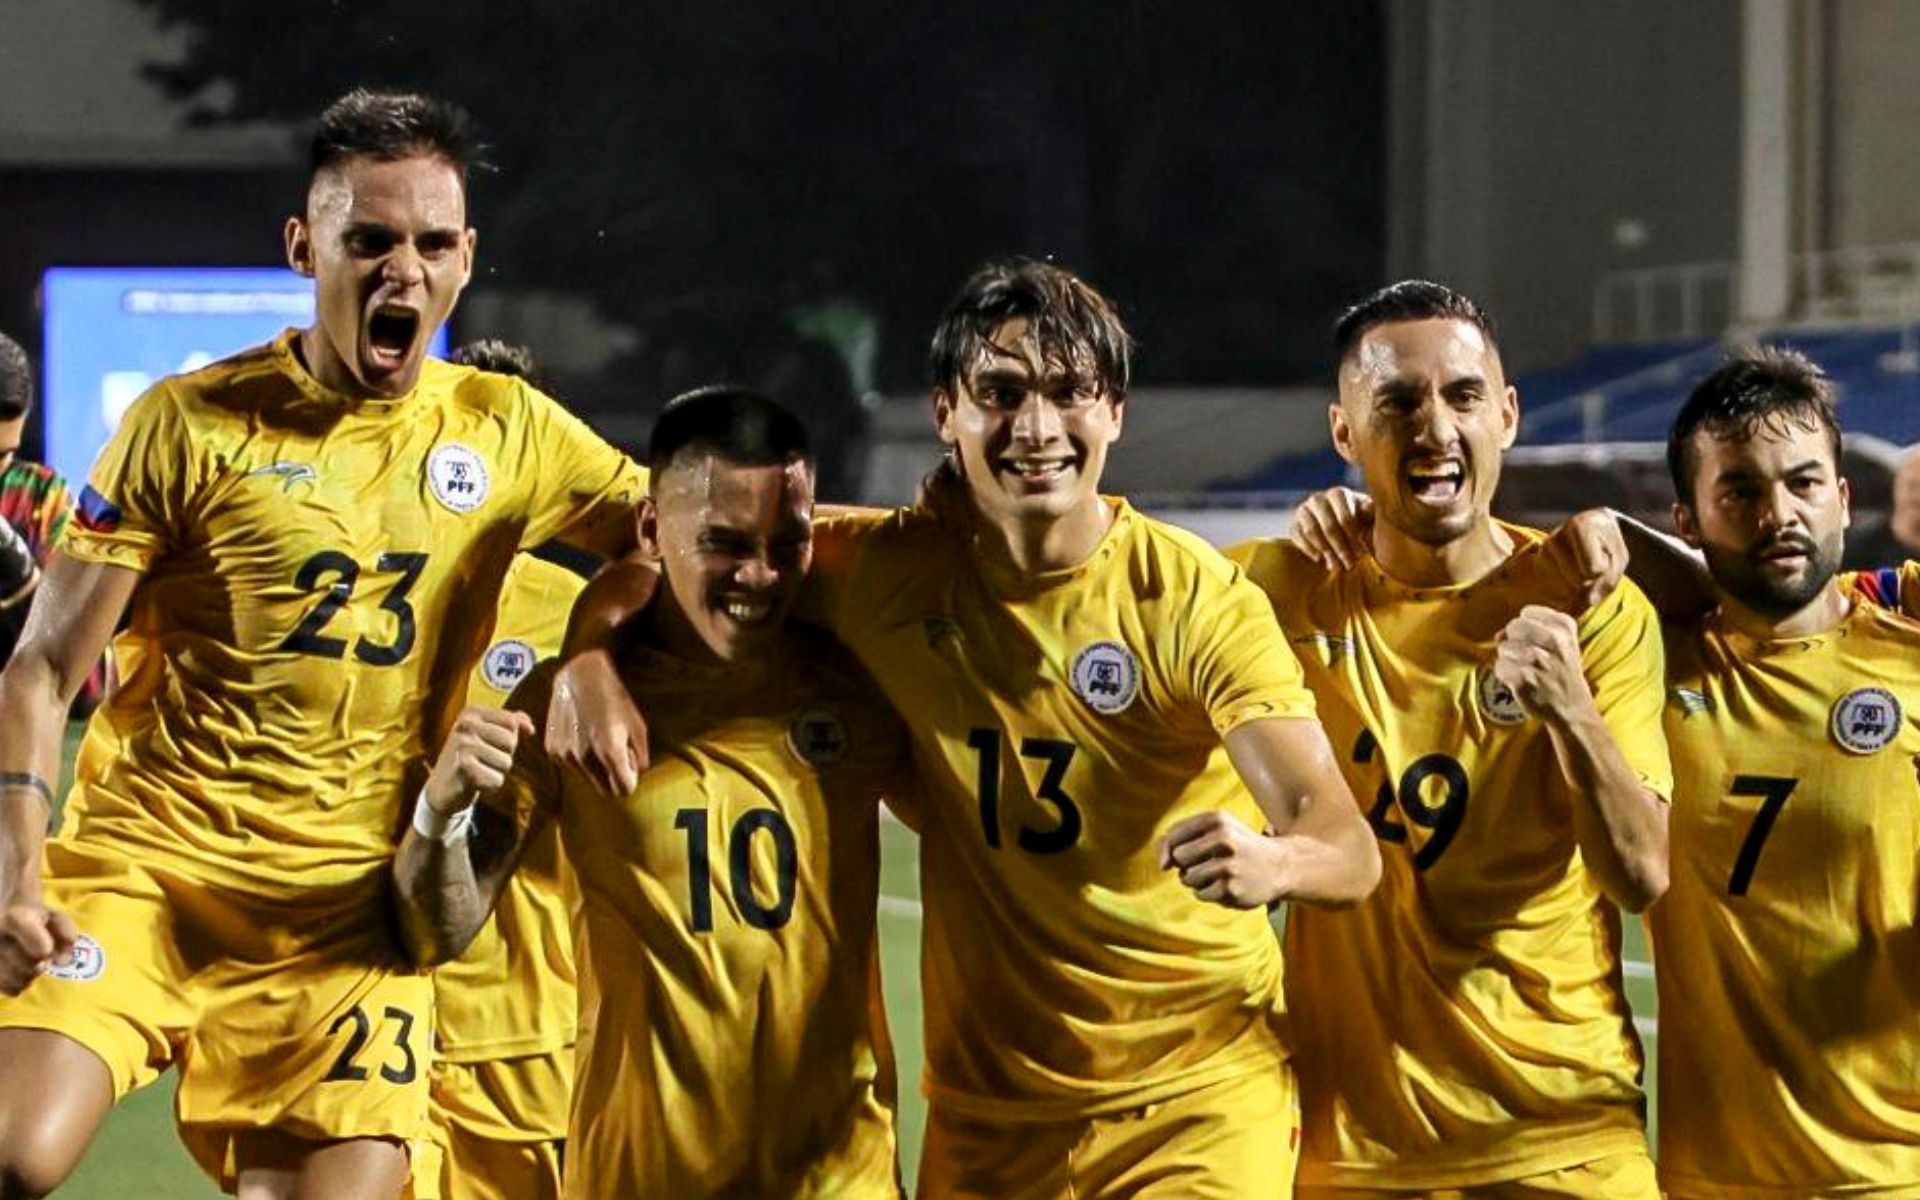 Azkals register a come-from-behind win in friendly versus Afghanistan